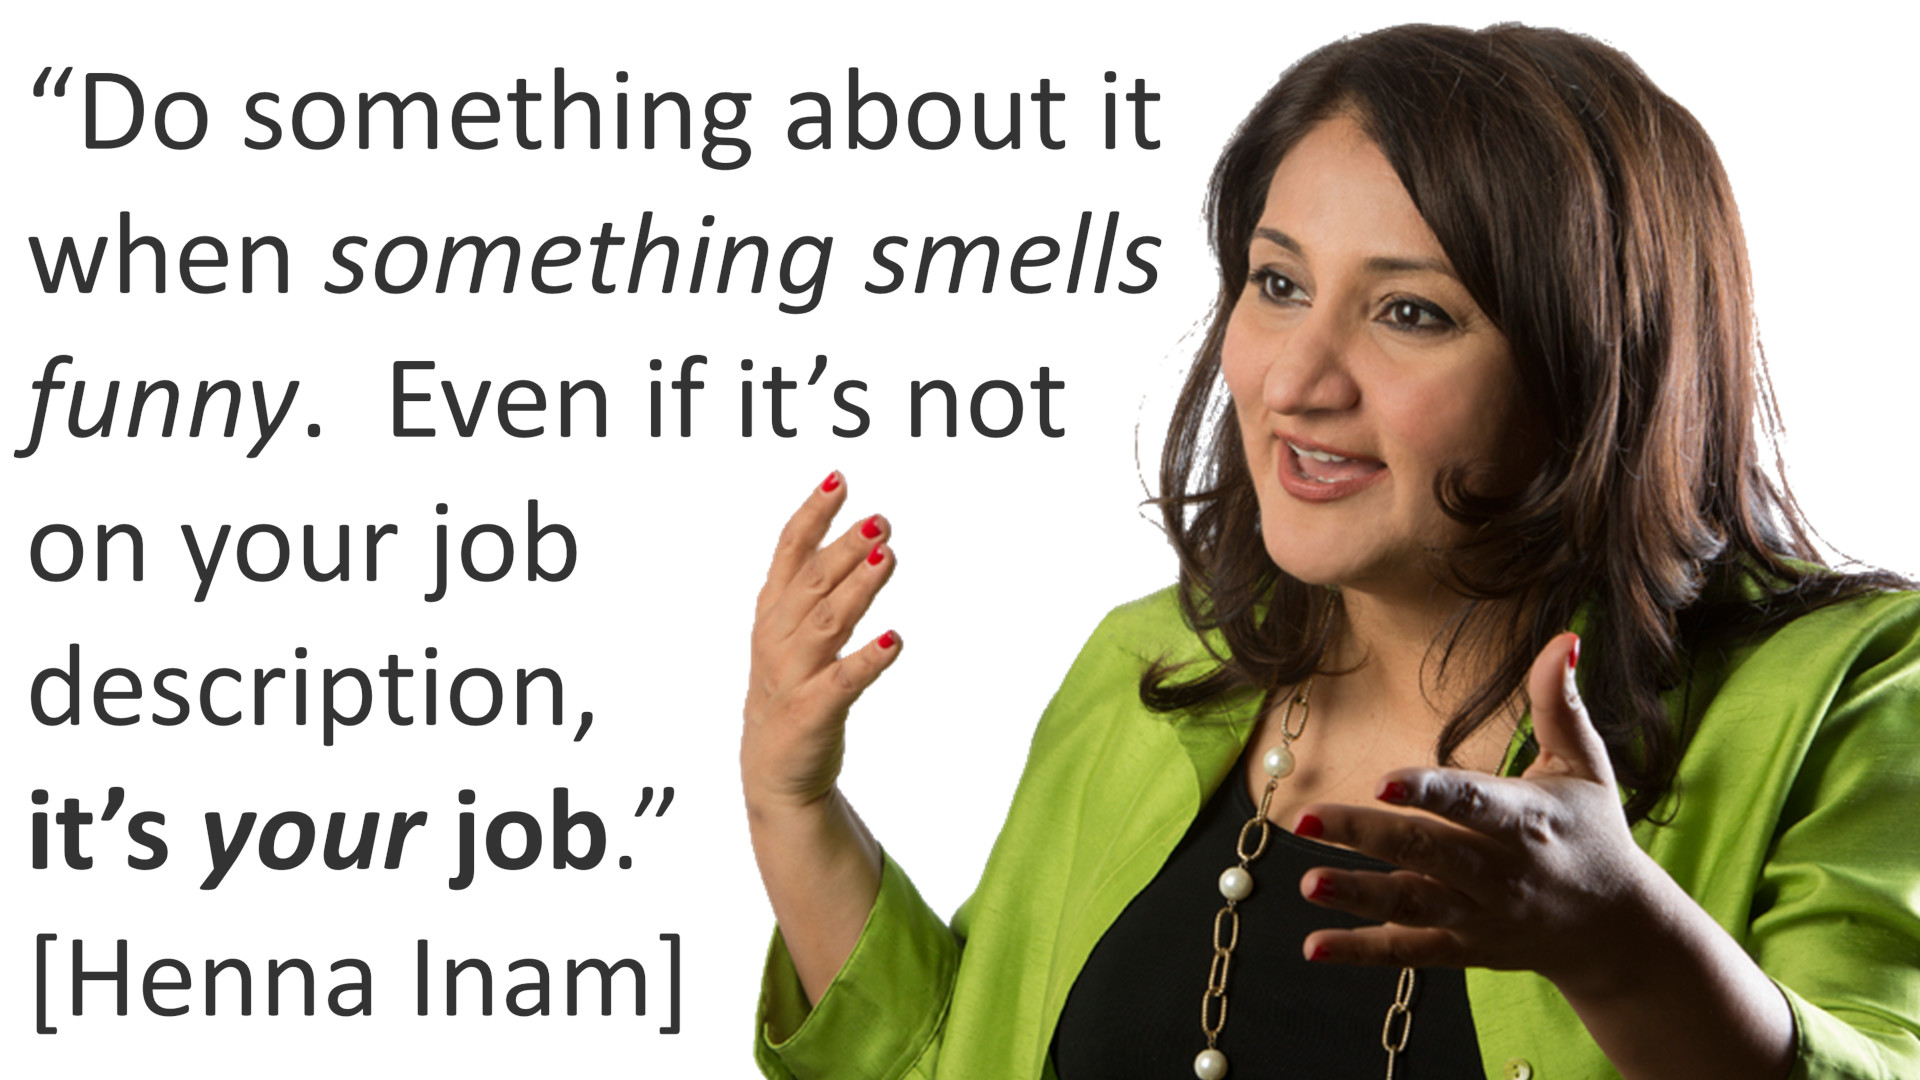 Do something about it when something smells funny. Even if it's not on your job description, it's your job.